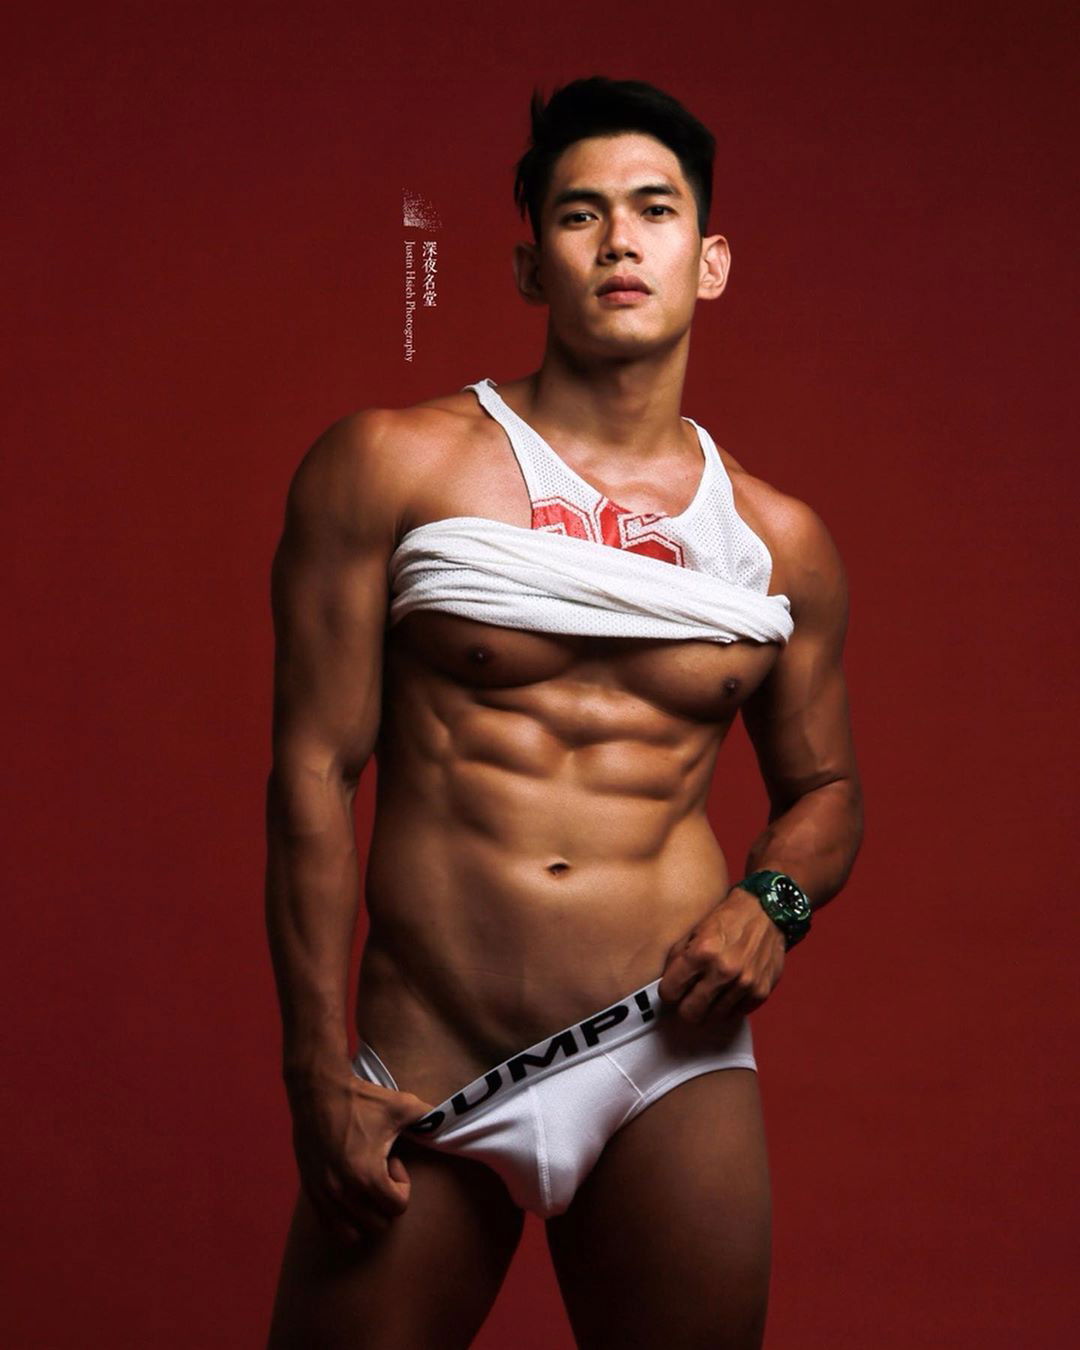 Photo by asianadonis with the username @asianadonis,  December 9, 2019 at 3:55 PM. The post is about the topic Asian Adonis and the text says 'Model: Akira Chung (鍾光祥) / GwangSang Jong (종광상)
Photographer: Justin Hsieh Photography (深夜名堂)'